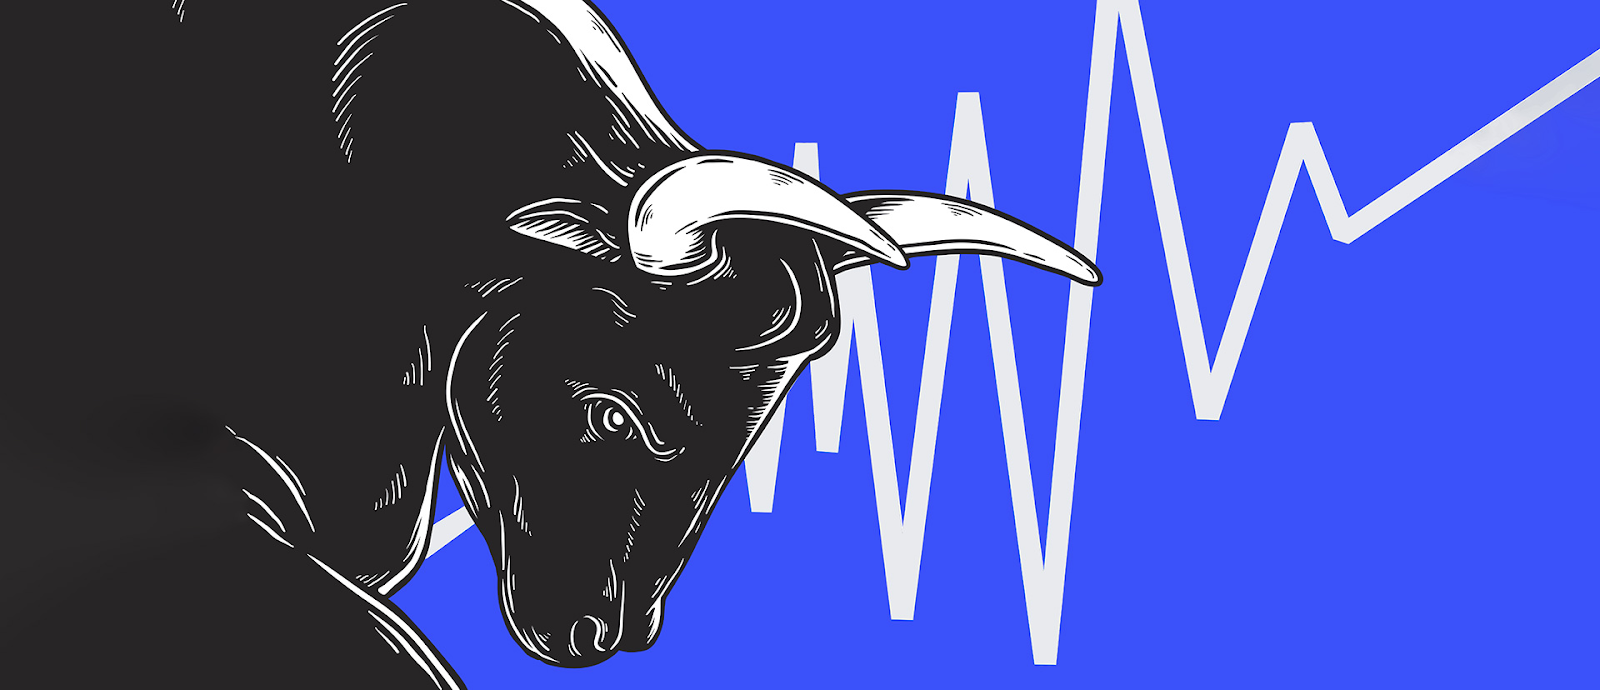 Read more about the article Bull Market: Characteristic and Trading Principles